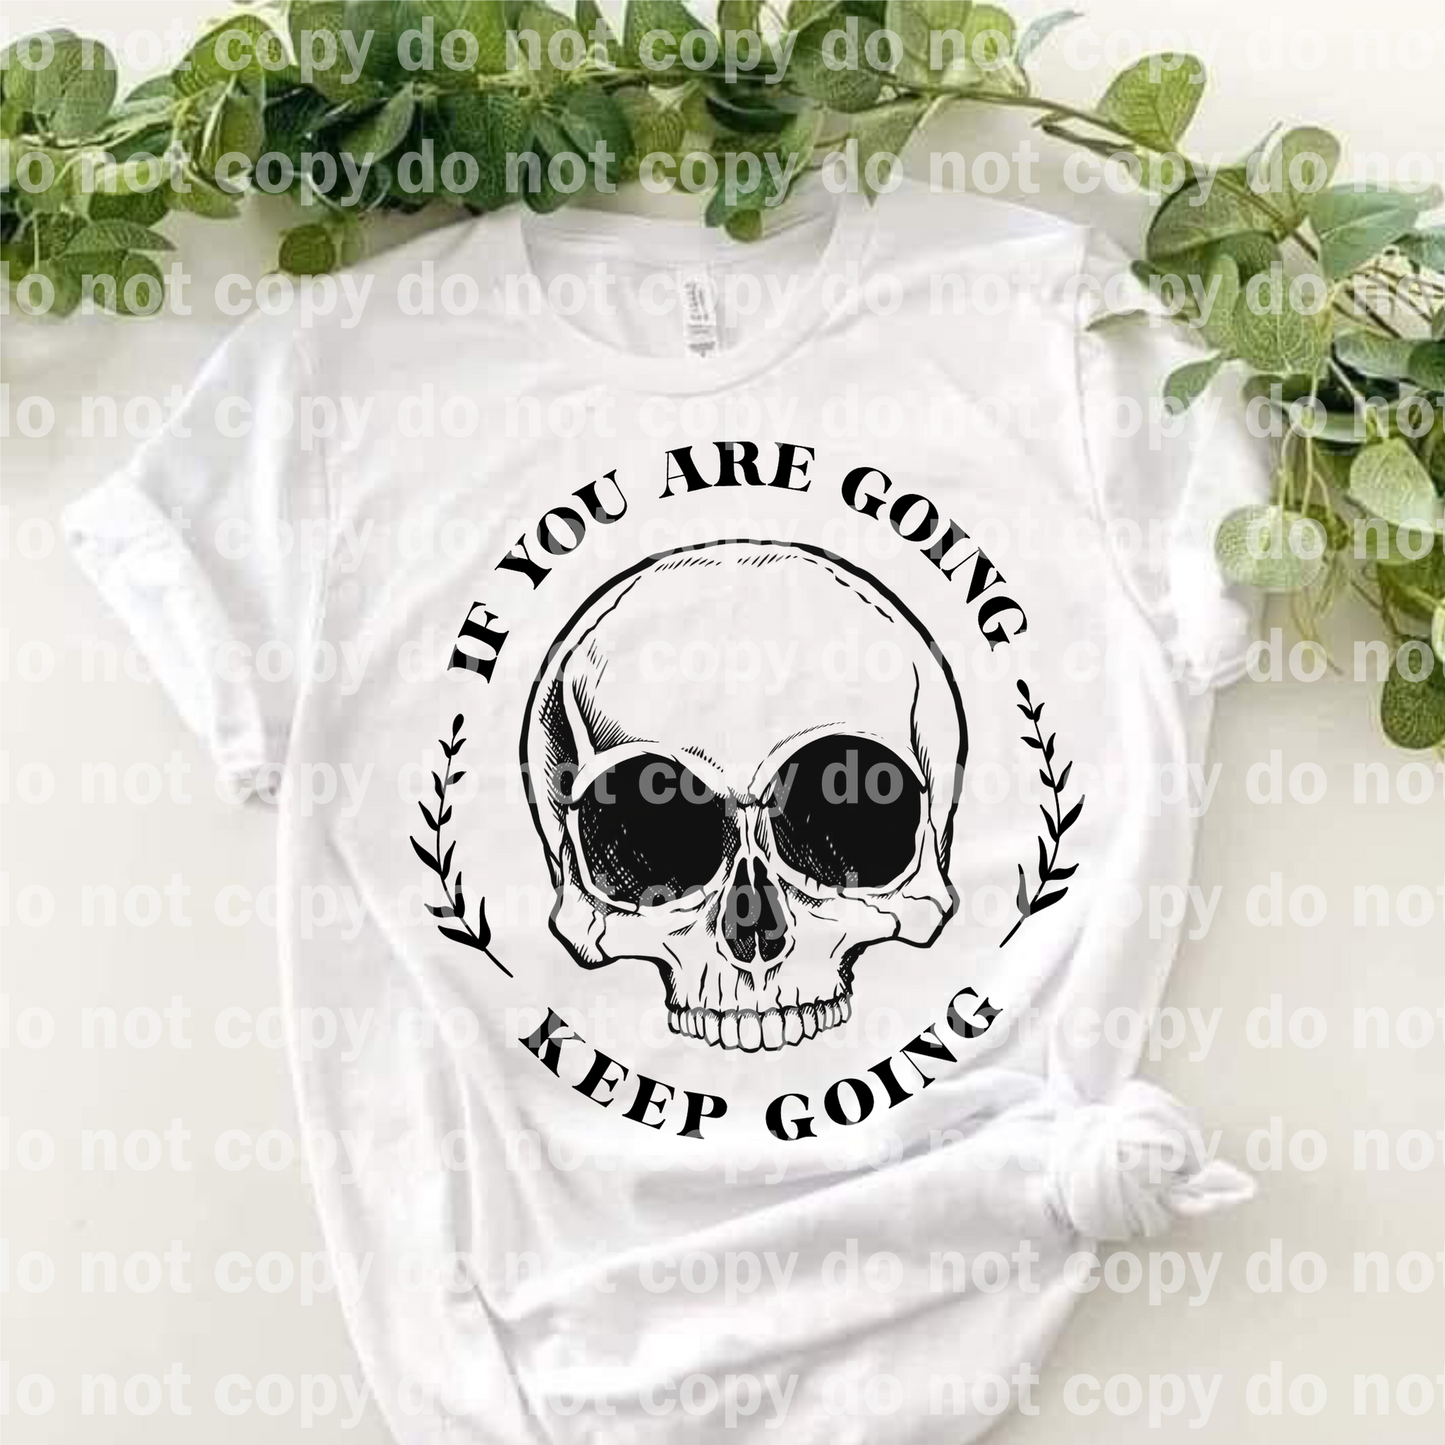 If You Are Going, Keep Going Skull Dream Print or Sublimation Print